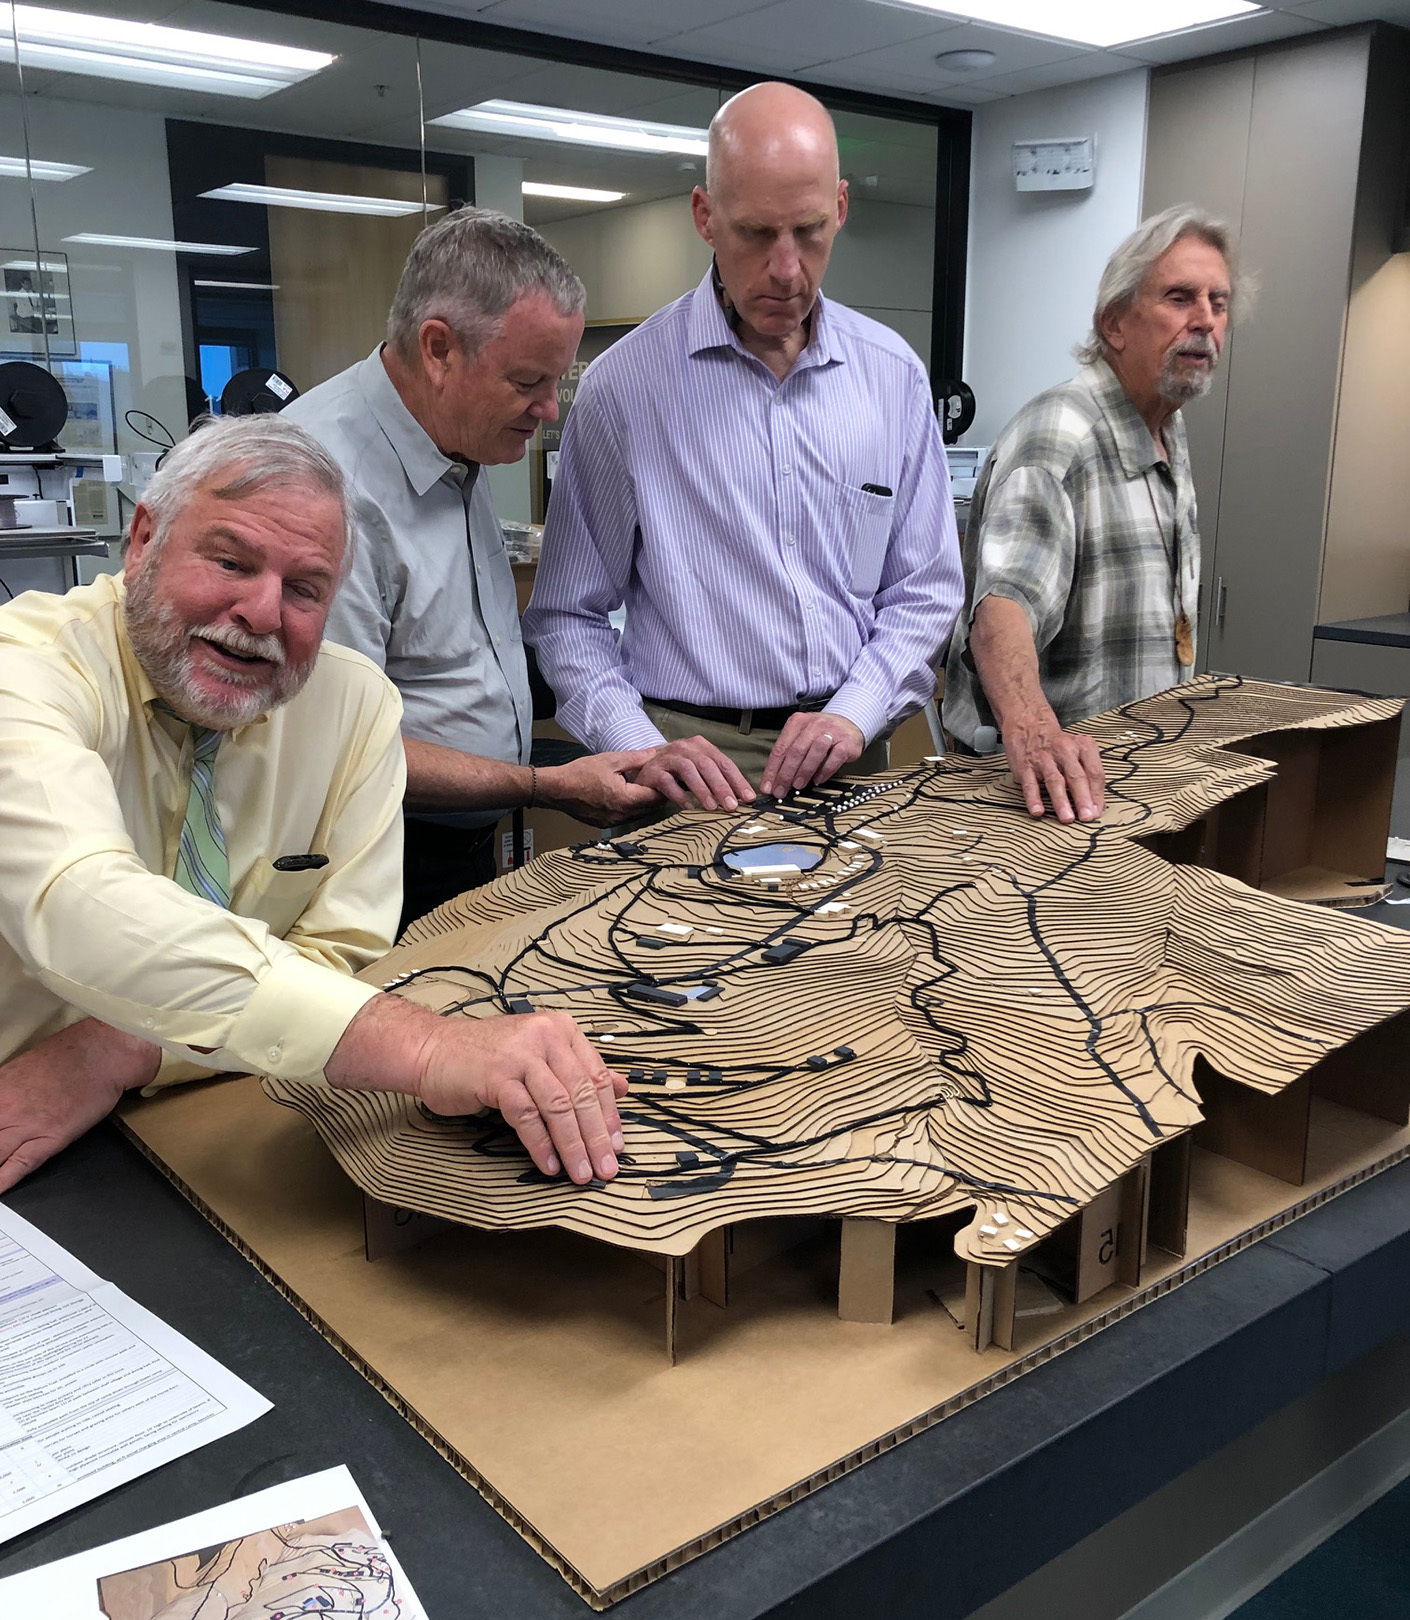 Demonstration of the tactile model. Four men feel the raised textures on the model.